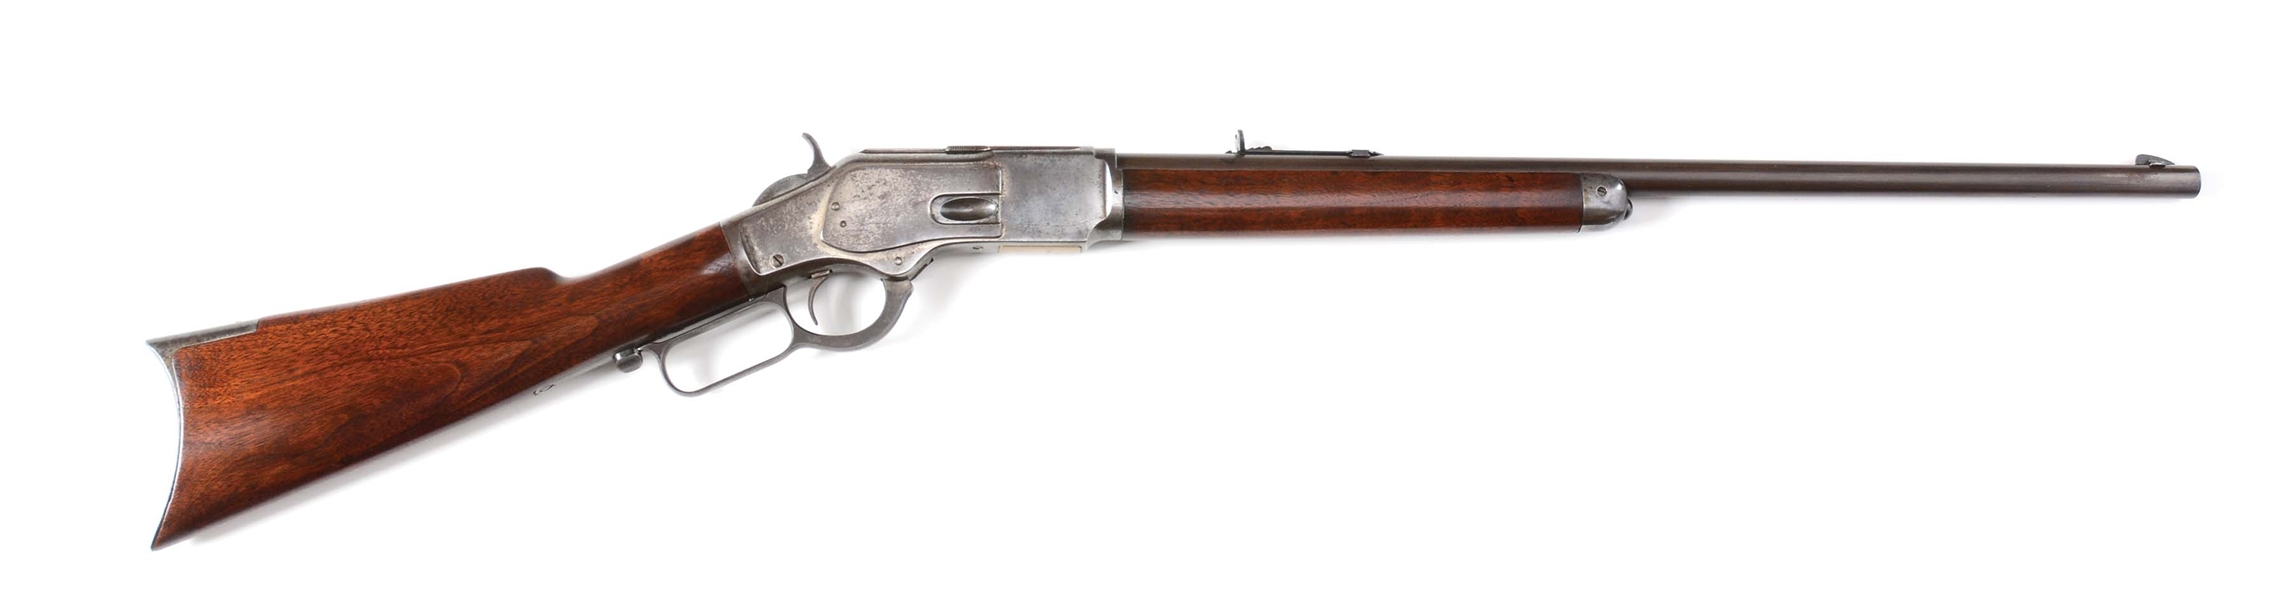 (A) WINCHESTER 1873 LEVER ACTION RIFLE (1888).